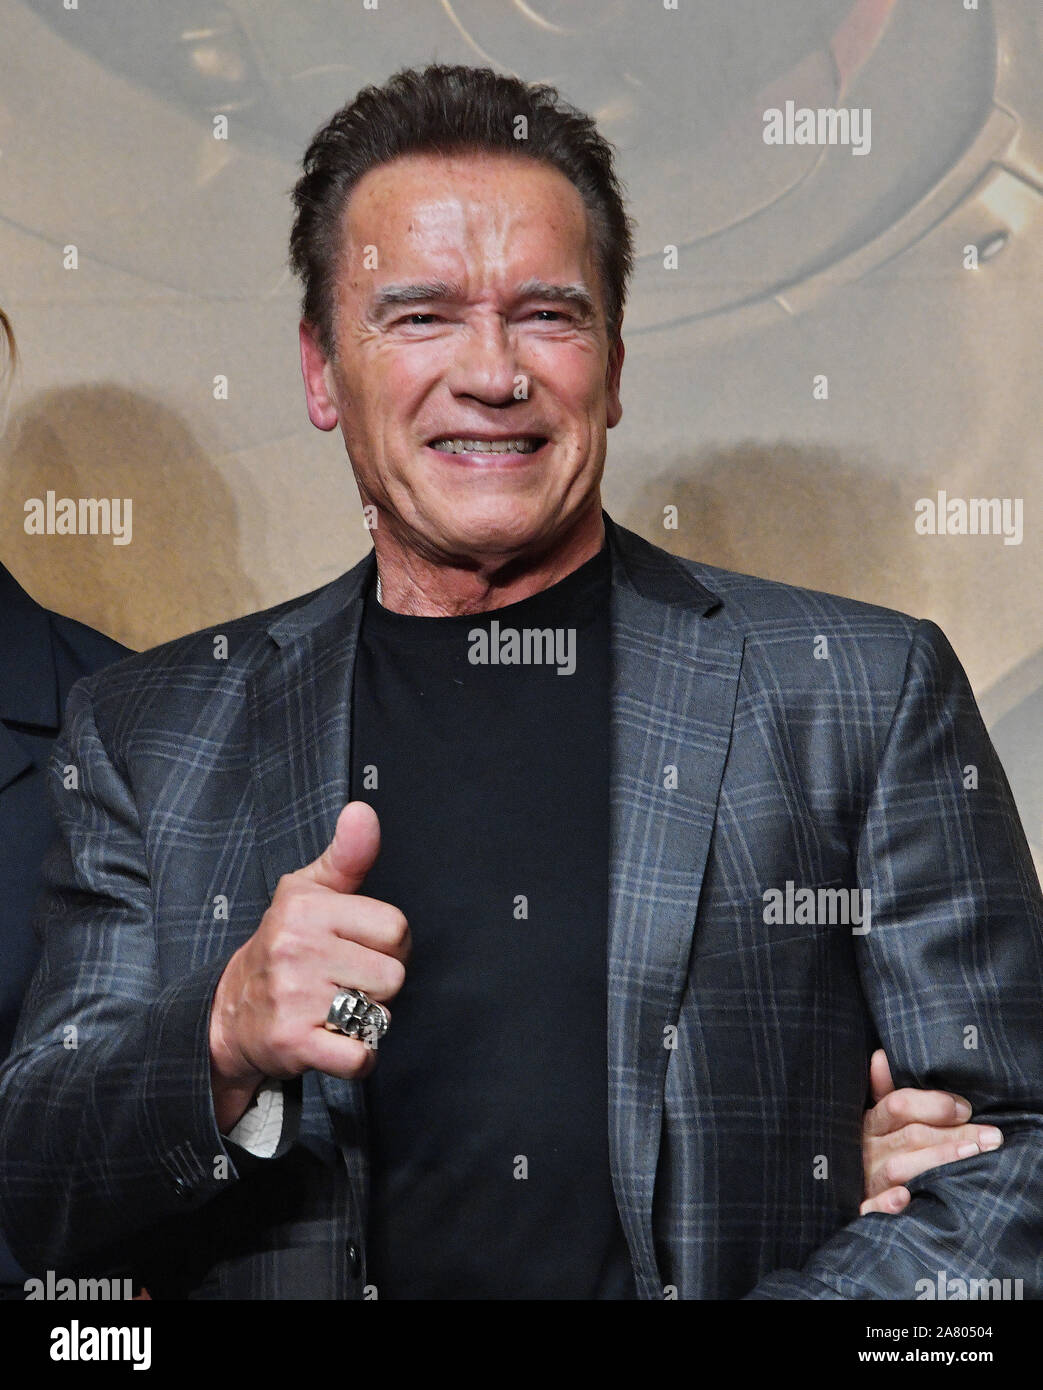 Tokyo, Japan. 05th Nov, 2019. Actor Arnold Schwarzenegger attends the press conference for the film 'Terminator: Dark Fate' in Tokyo, Japan on Tuesday, November 5, 2019. 'Terminator: Dark Fate' set 25 years after the events of 'Terminator 2', filming took place from June to November 2018 in Hungary, Spain and the United States. James Cameron return to production and actress Linda Hamilton play Sara Conner for the first time in 28 years. This film open November 8 in Japan. Photo by MORI Keizo/UPI Credit: UPI/Alamy Live News Stock Photo